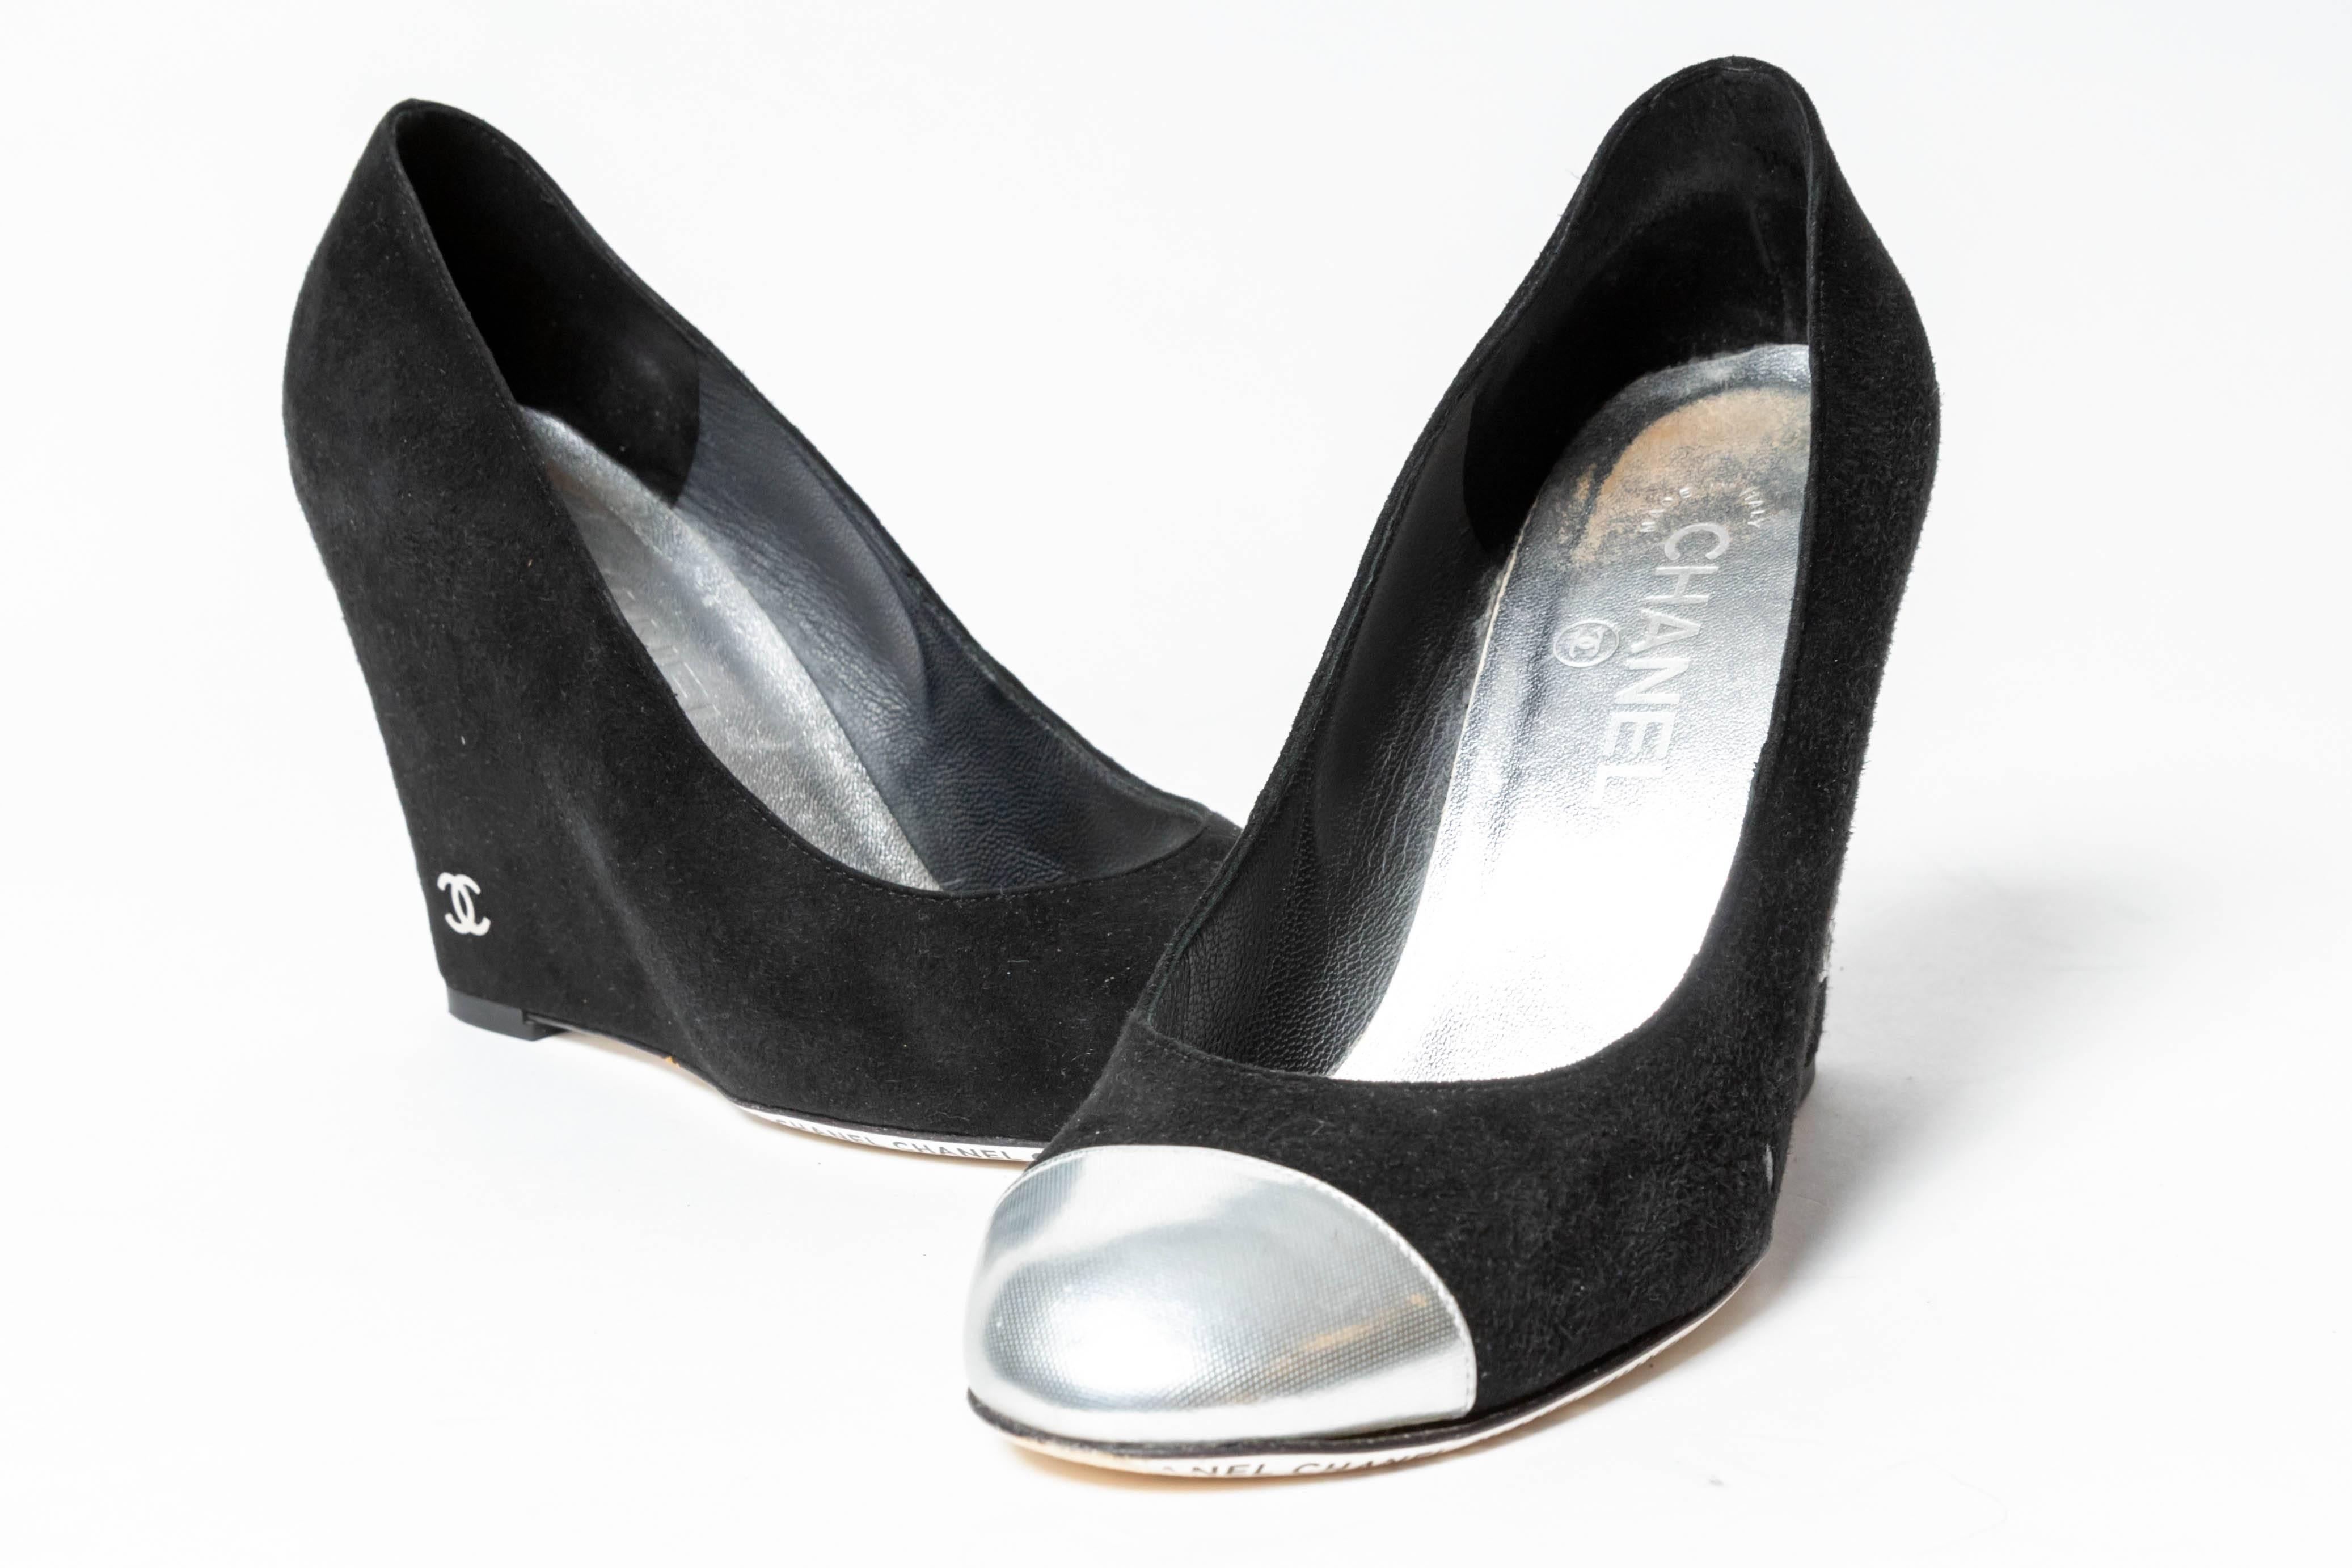 Chanel Silver and Black Suede Wedges - Size 37.5 / 7.5 5